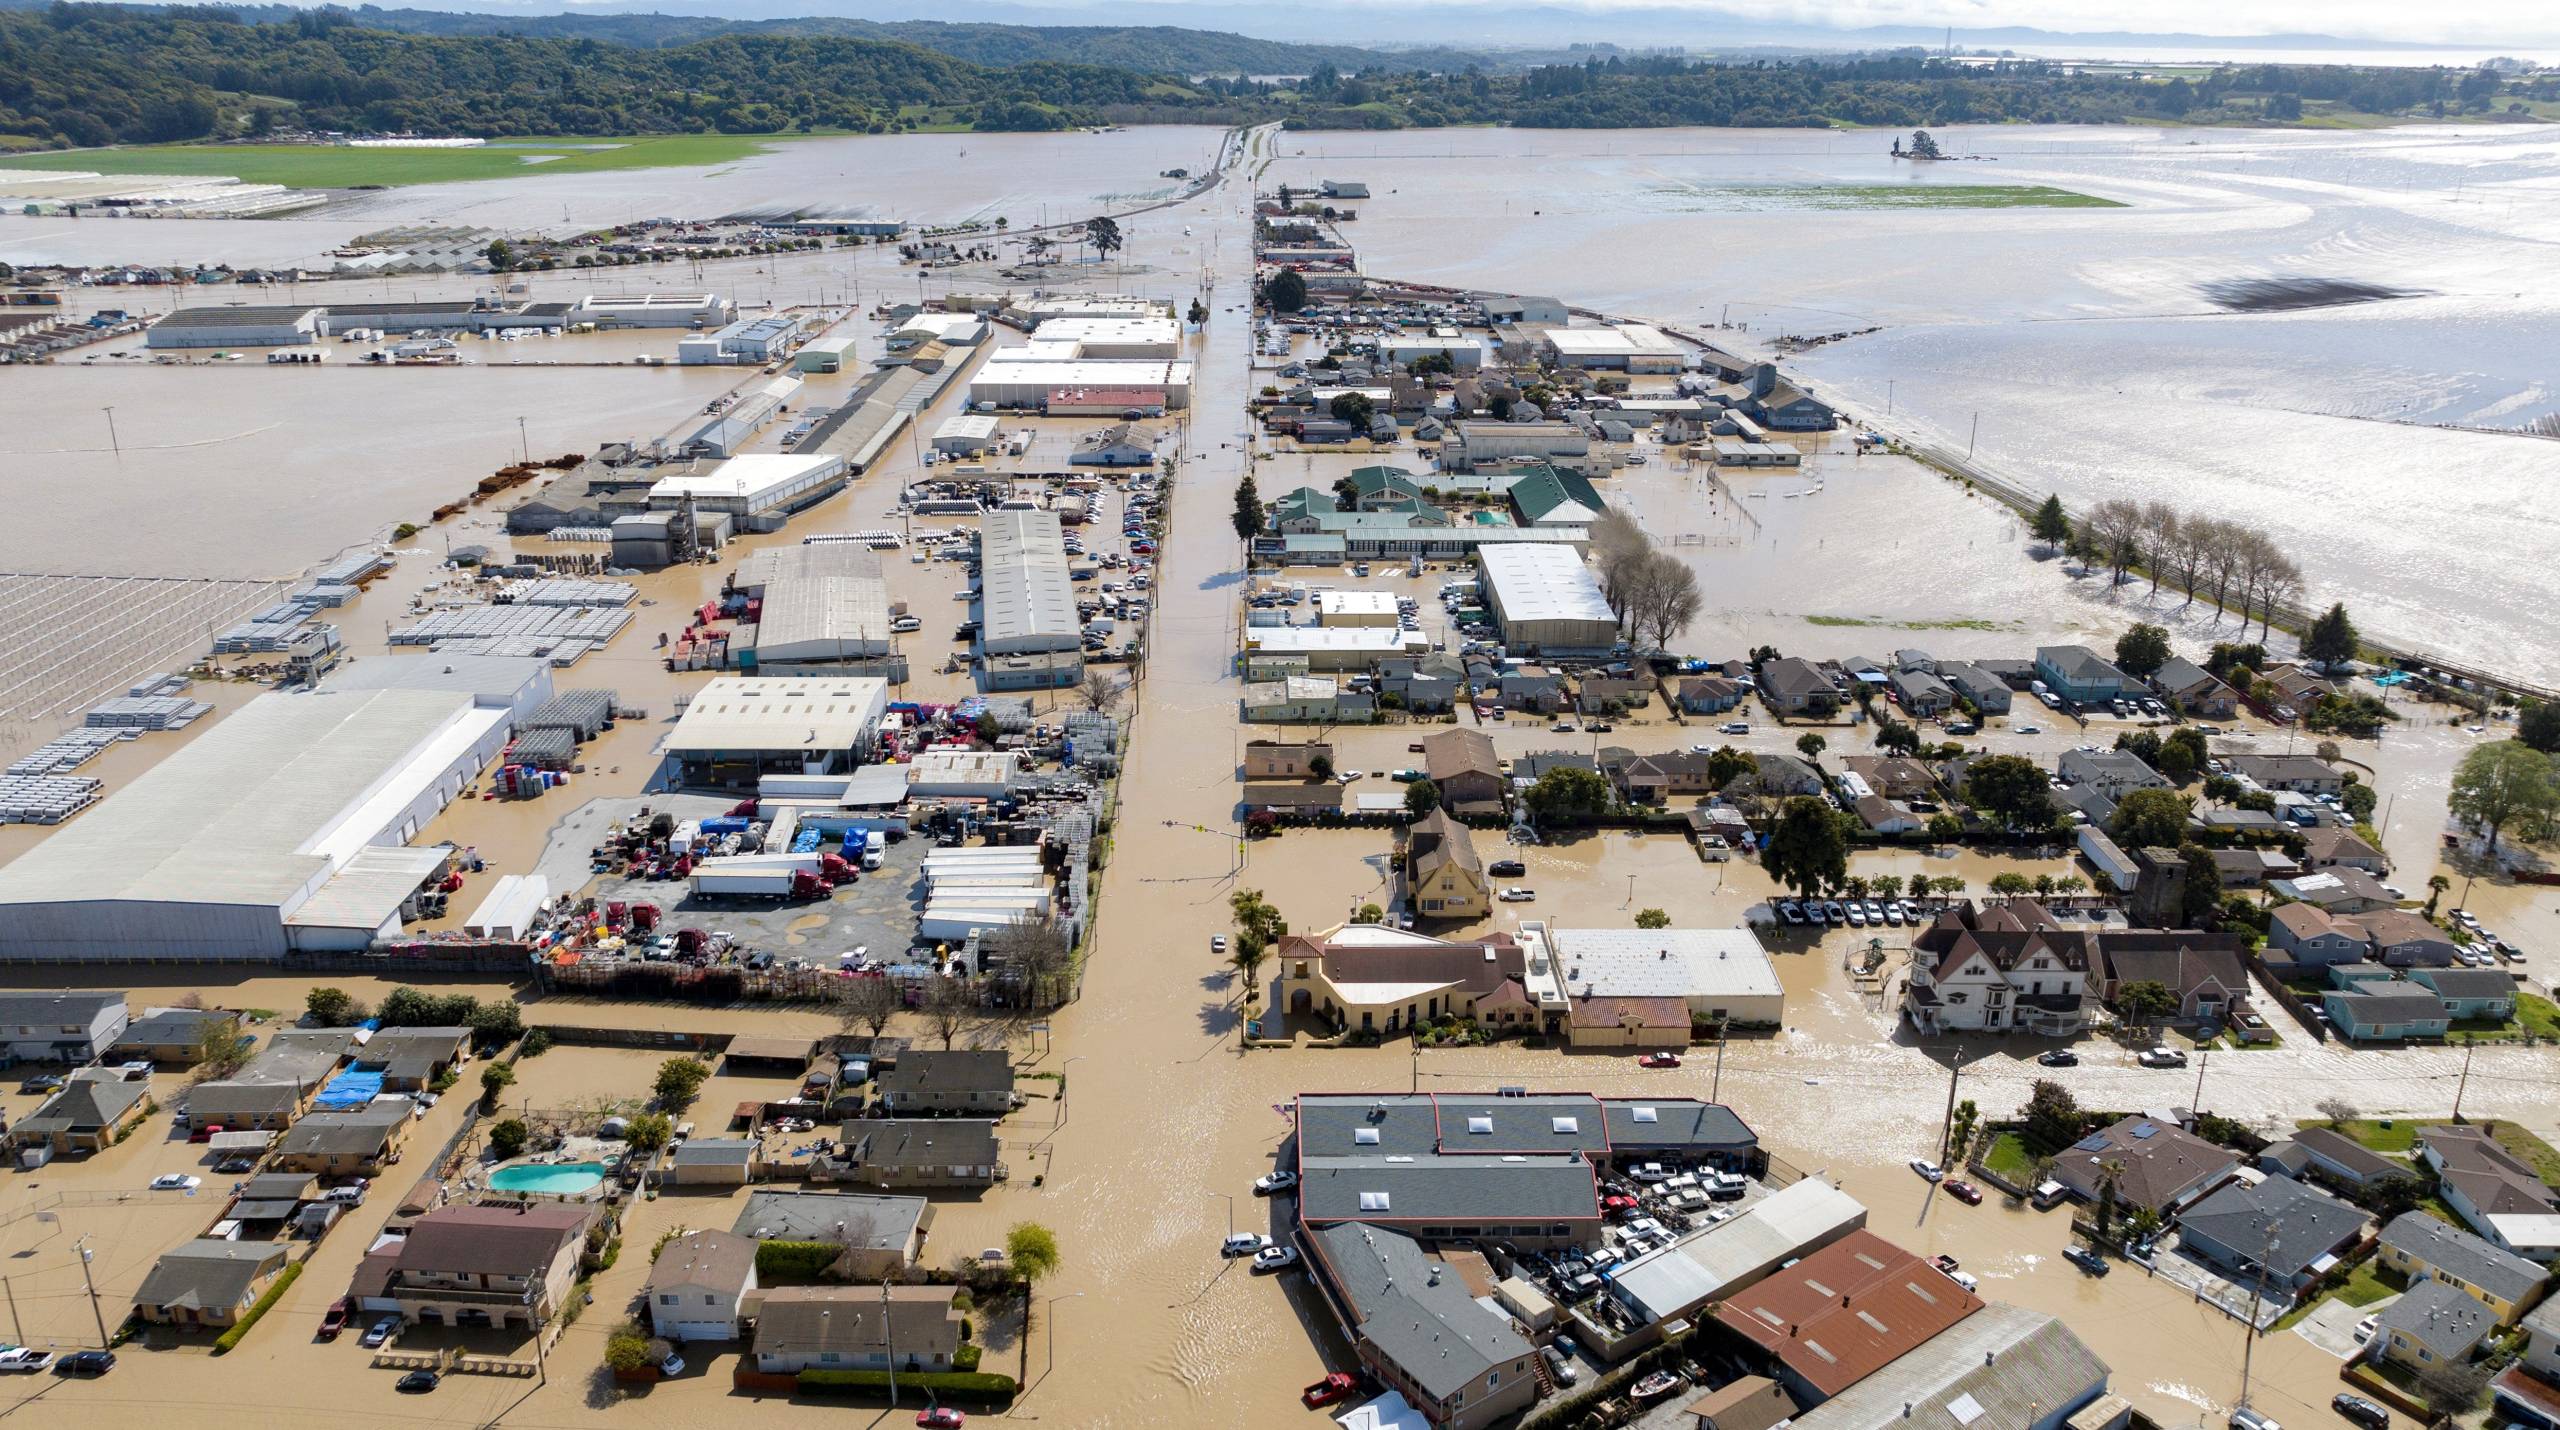 An aerial view shows many buildings, homes, streets and cars flooded with brown water.